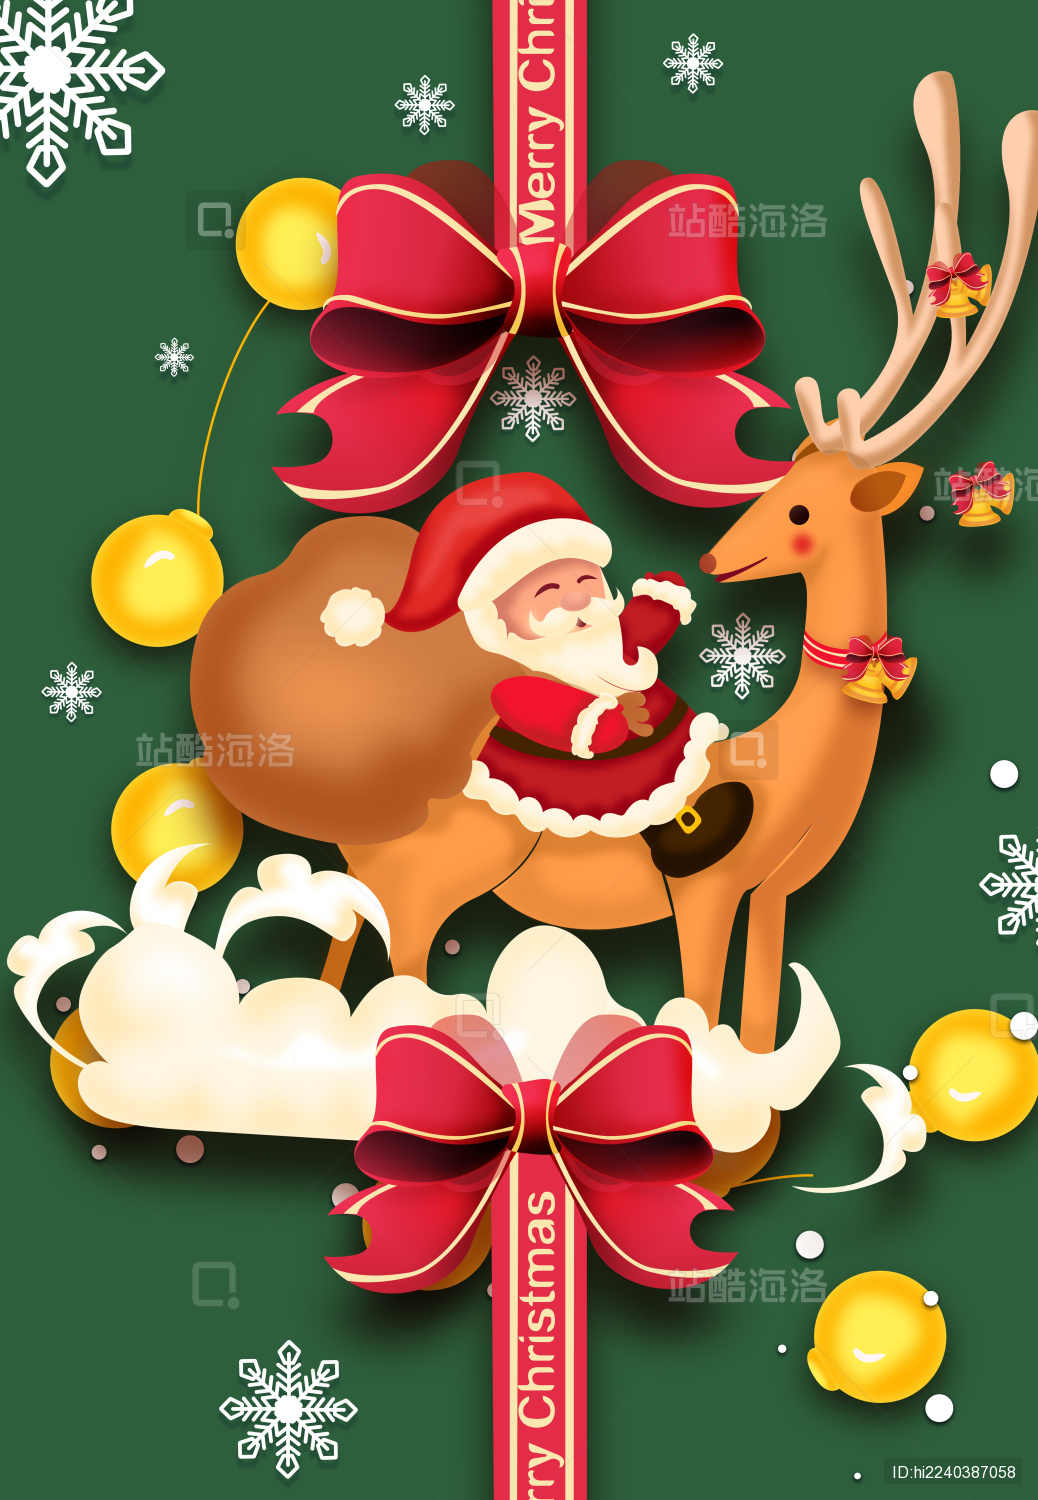 Santa Riding An Elk PNG Image And Clipart Image For Free Download - Lovepik | 401657968